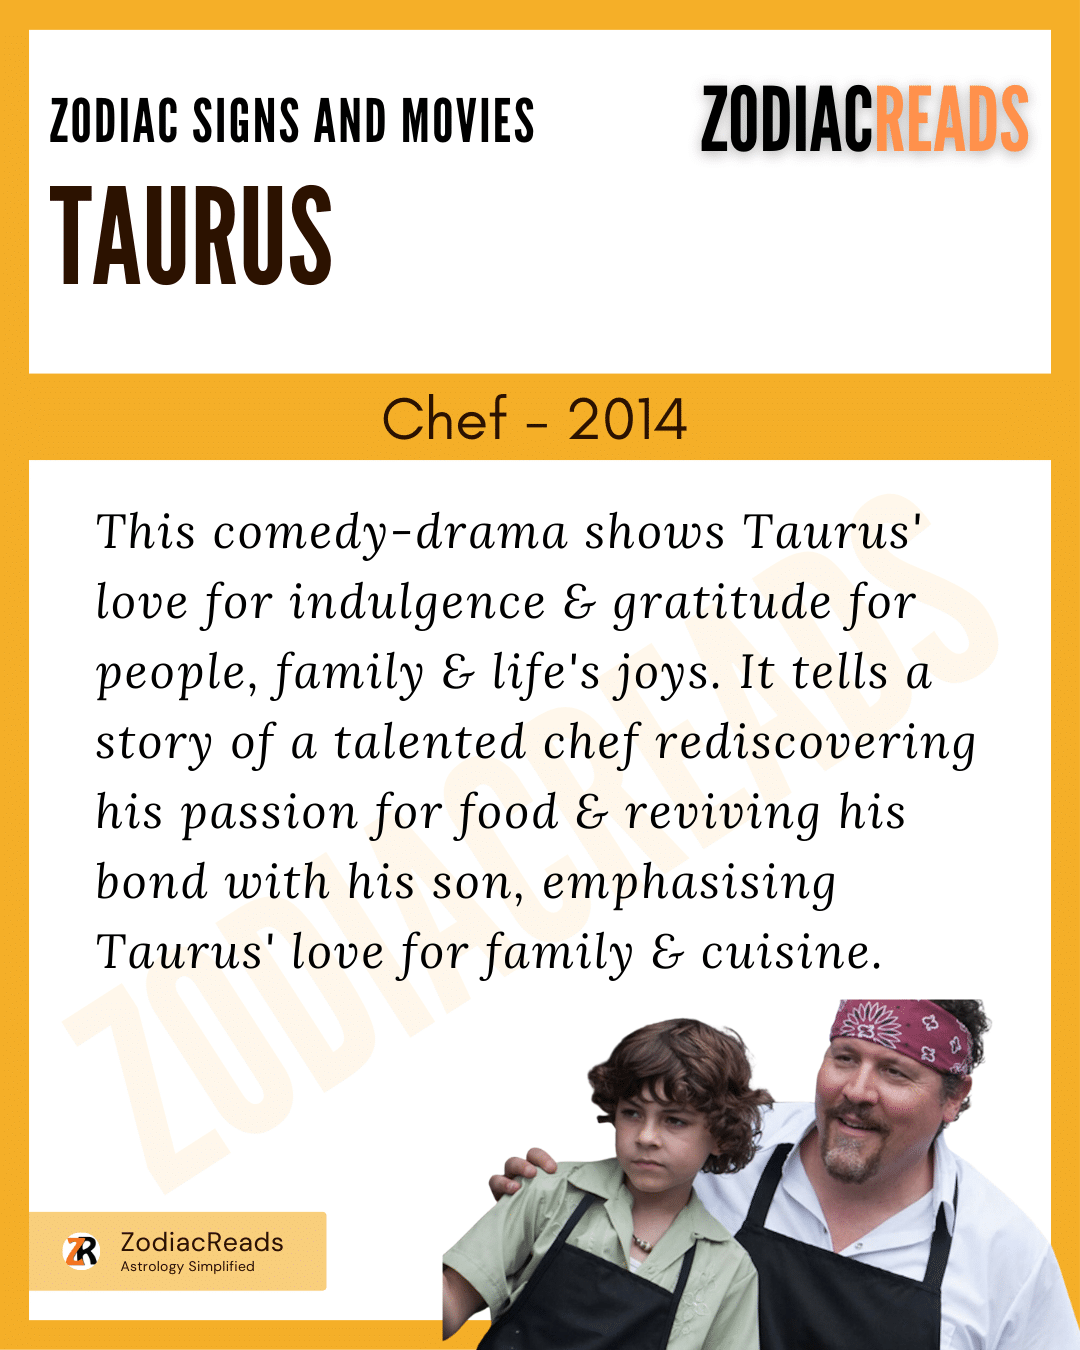 Taurus - Chef Zodiac Signs and Movies